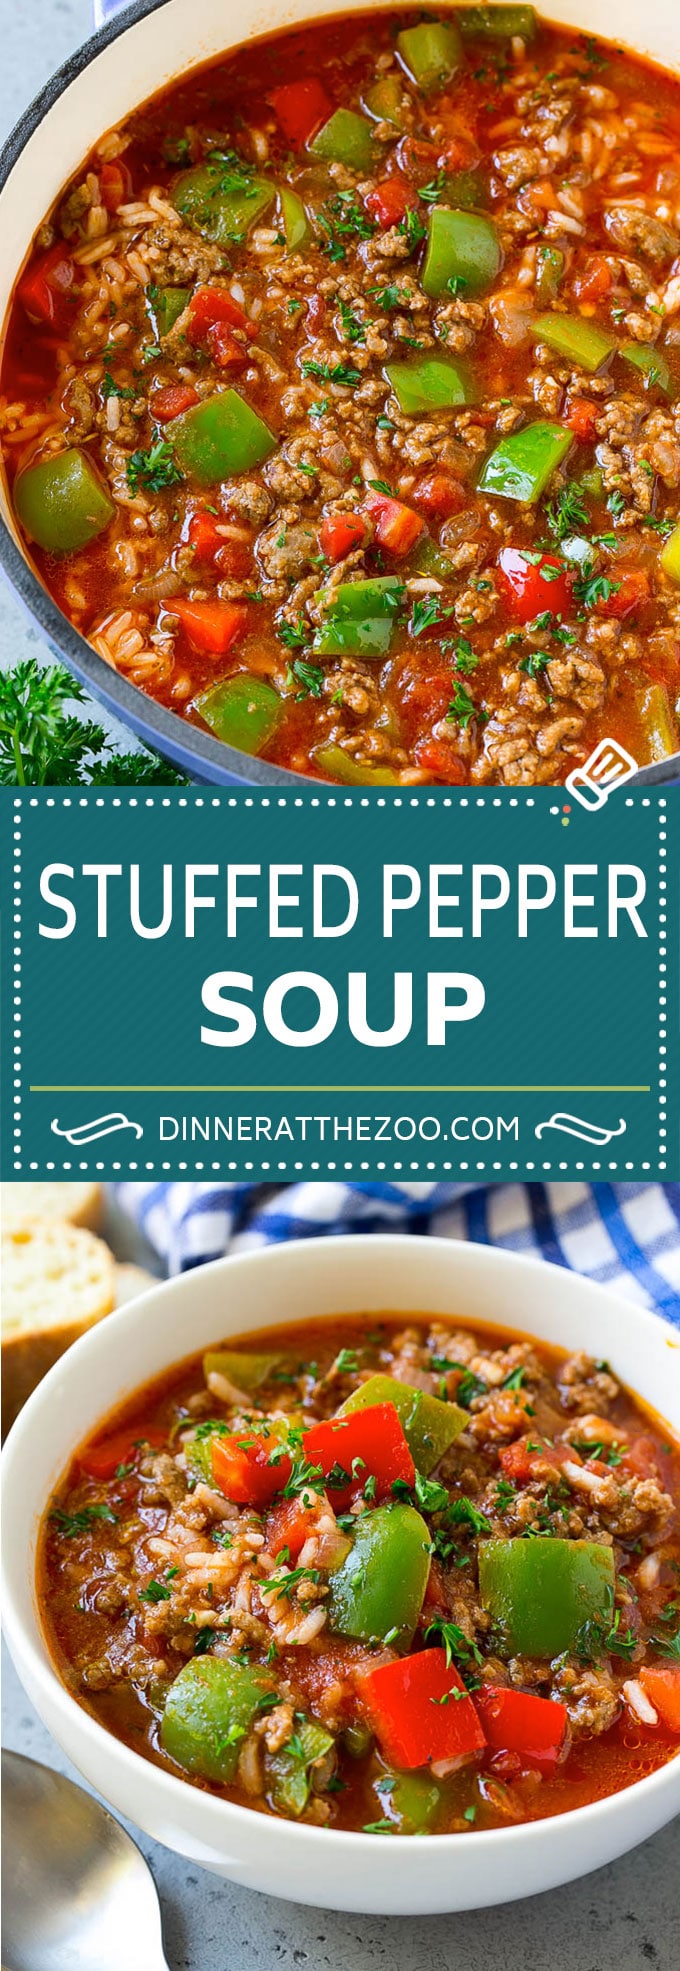 Stuffed Pepper Soup Recipe | Beef and Rice Soup | Stuffed Peppers #peppers #soup #beef #rice #dinner #dinneratthezoo